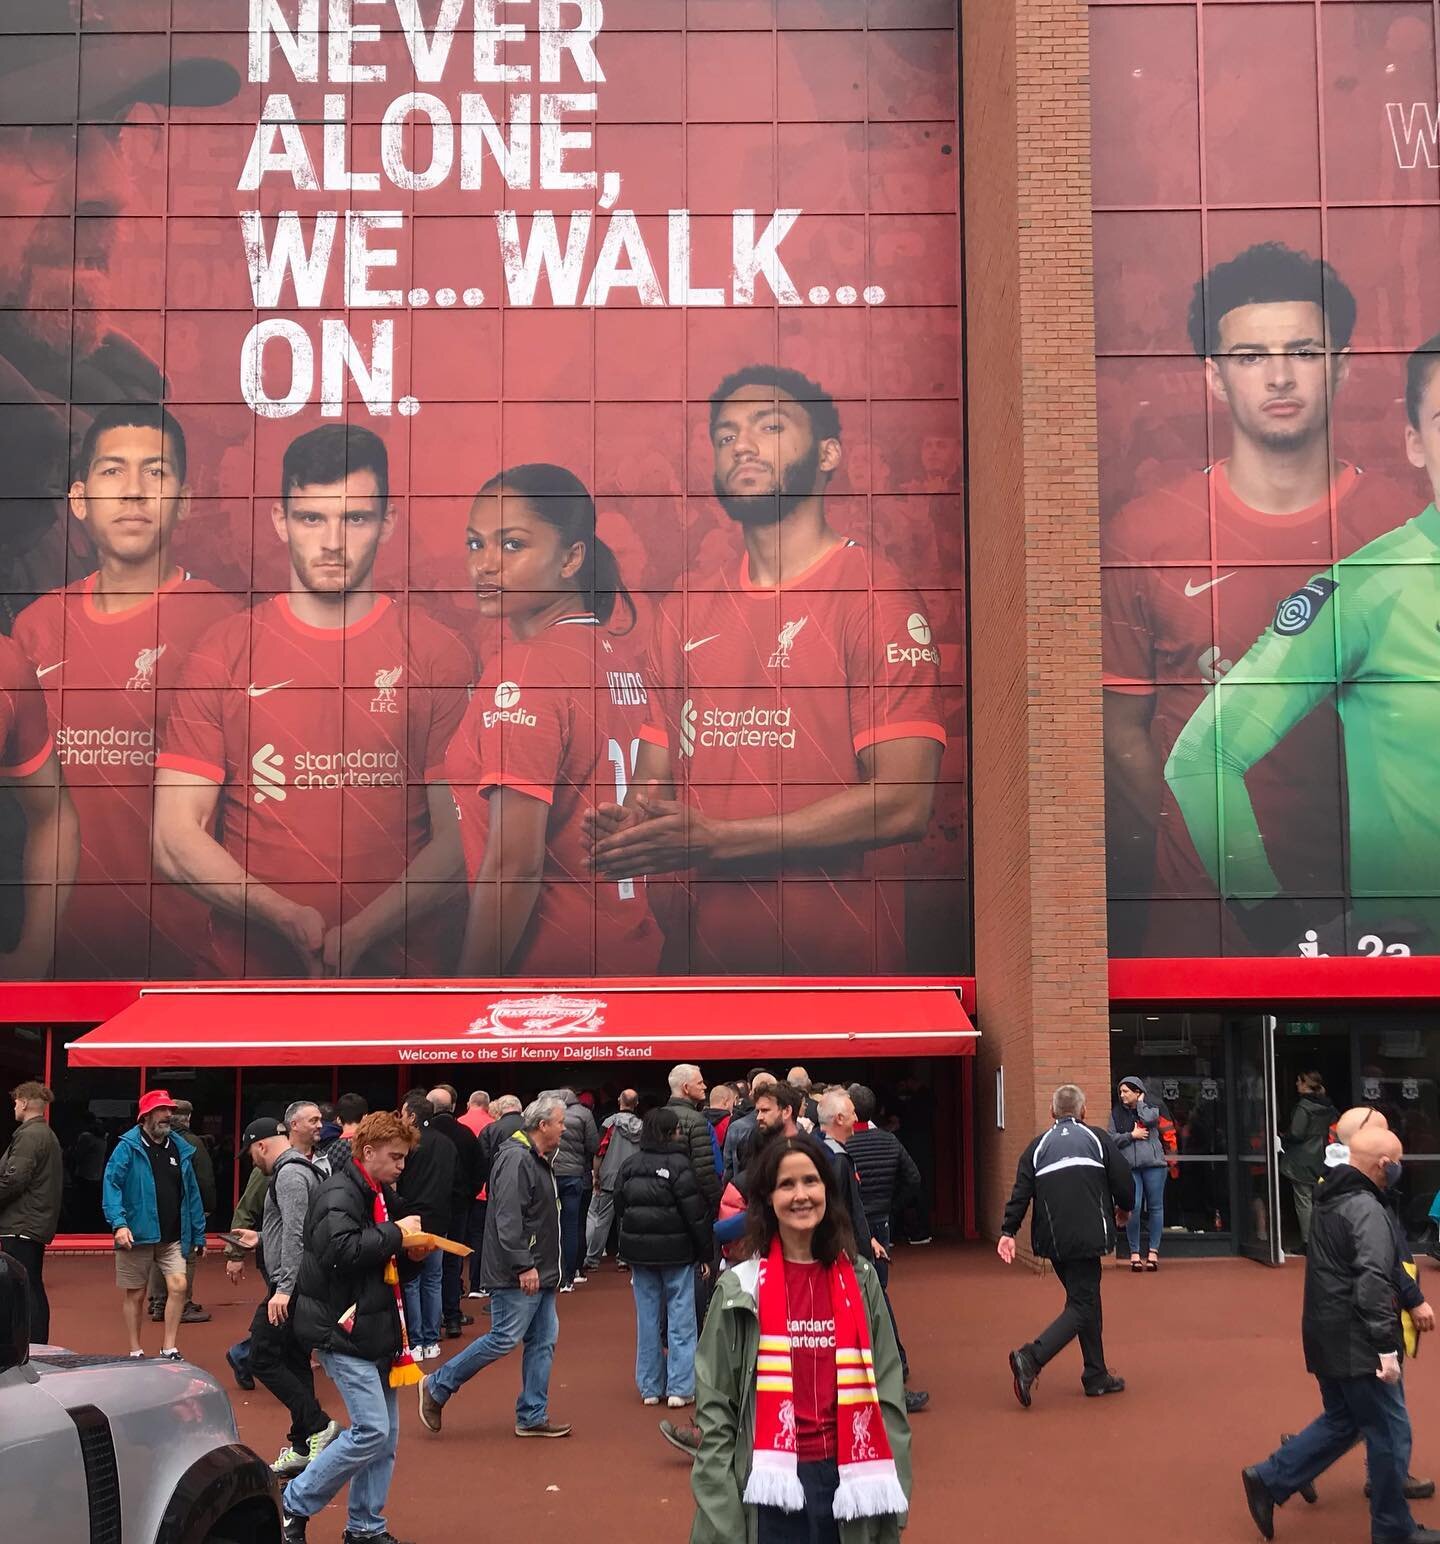 I&rsquo;m a massive fan of Liverpool Football Club, my local team, so it was thrilling - and a little daunting - to attend the first full-capacity home Premier League match since covid struck. It feels like things are inching back to a kind of normal